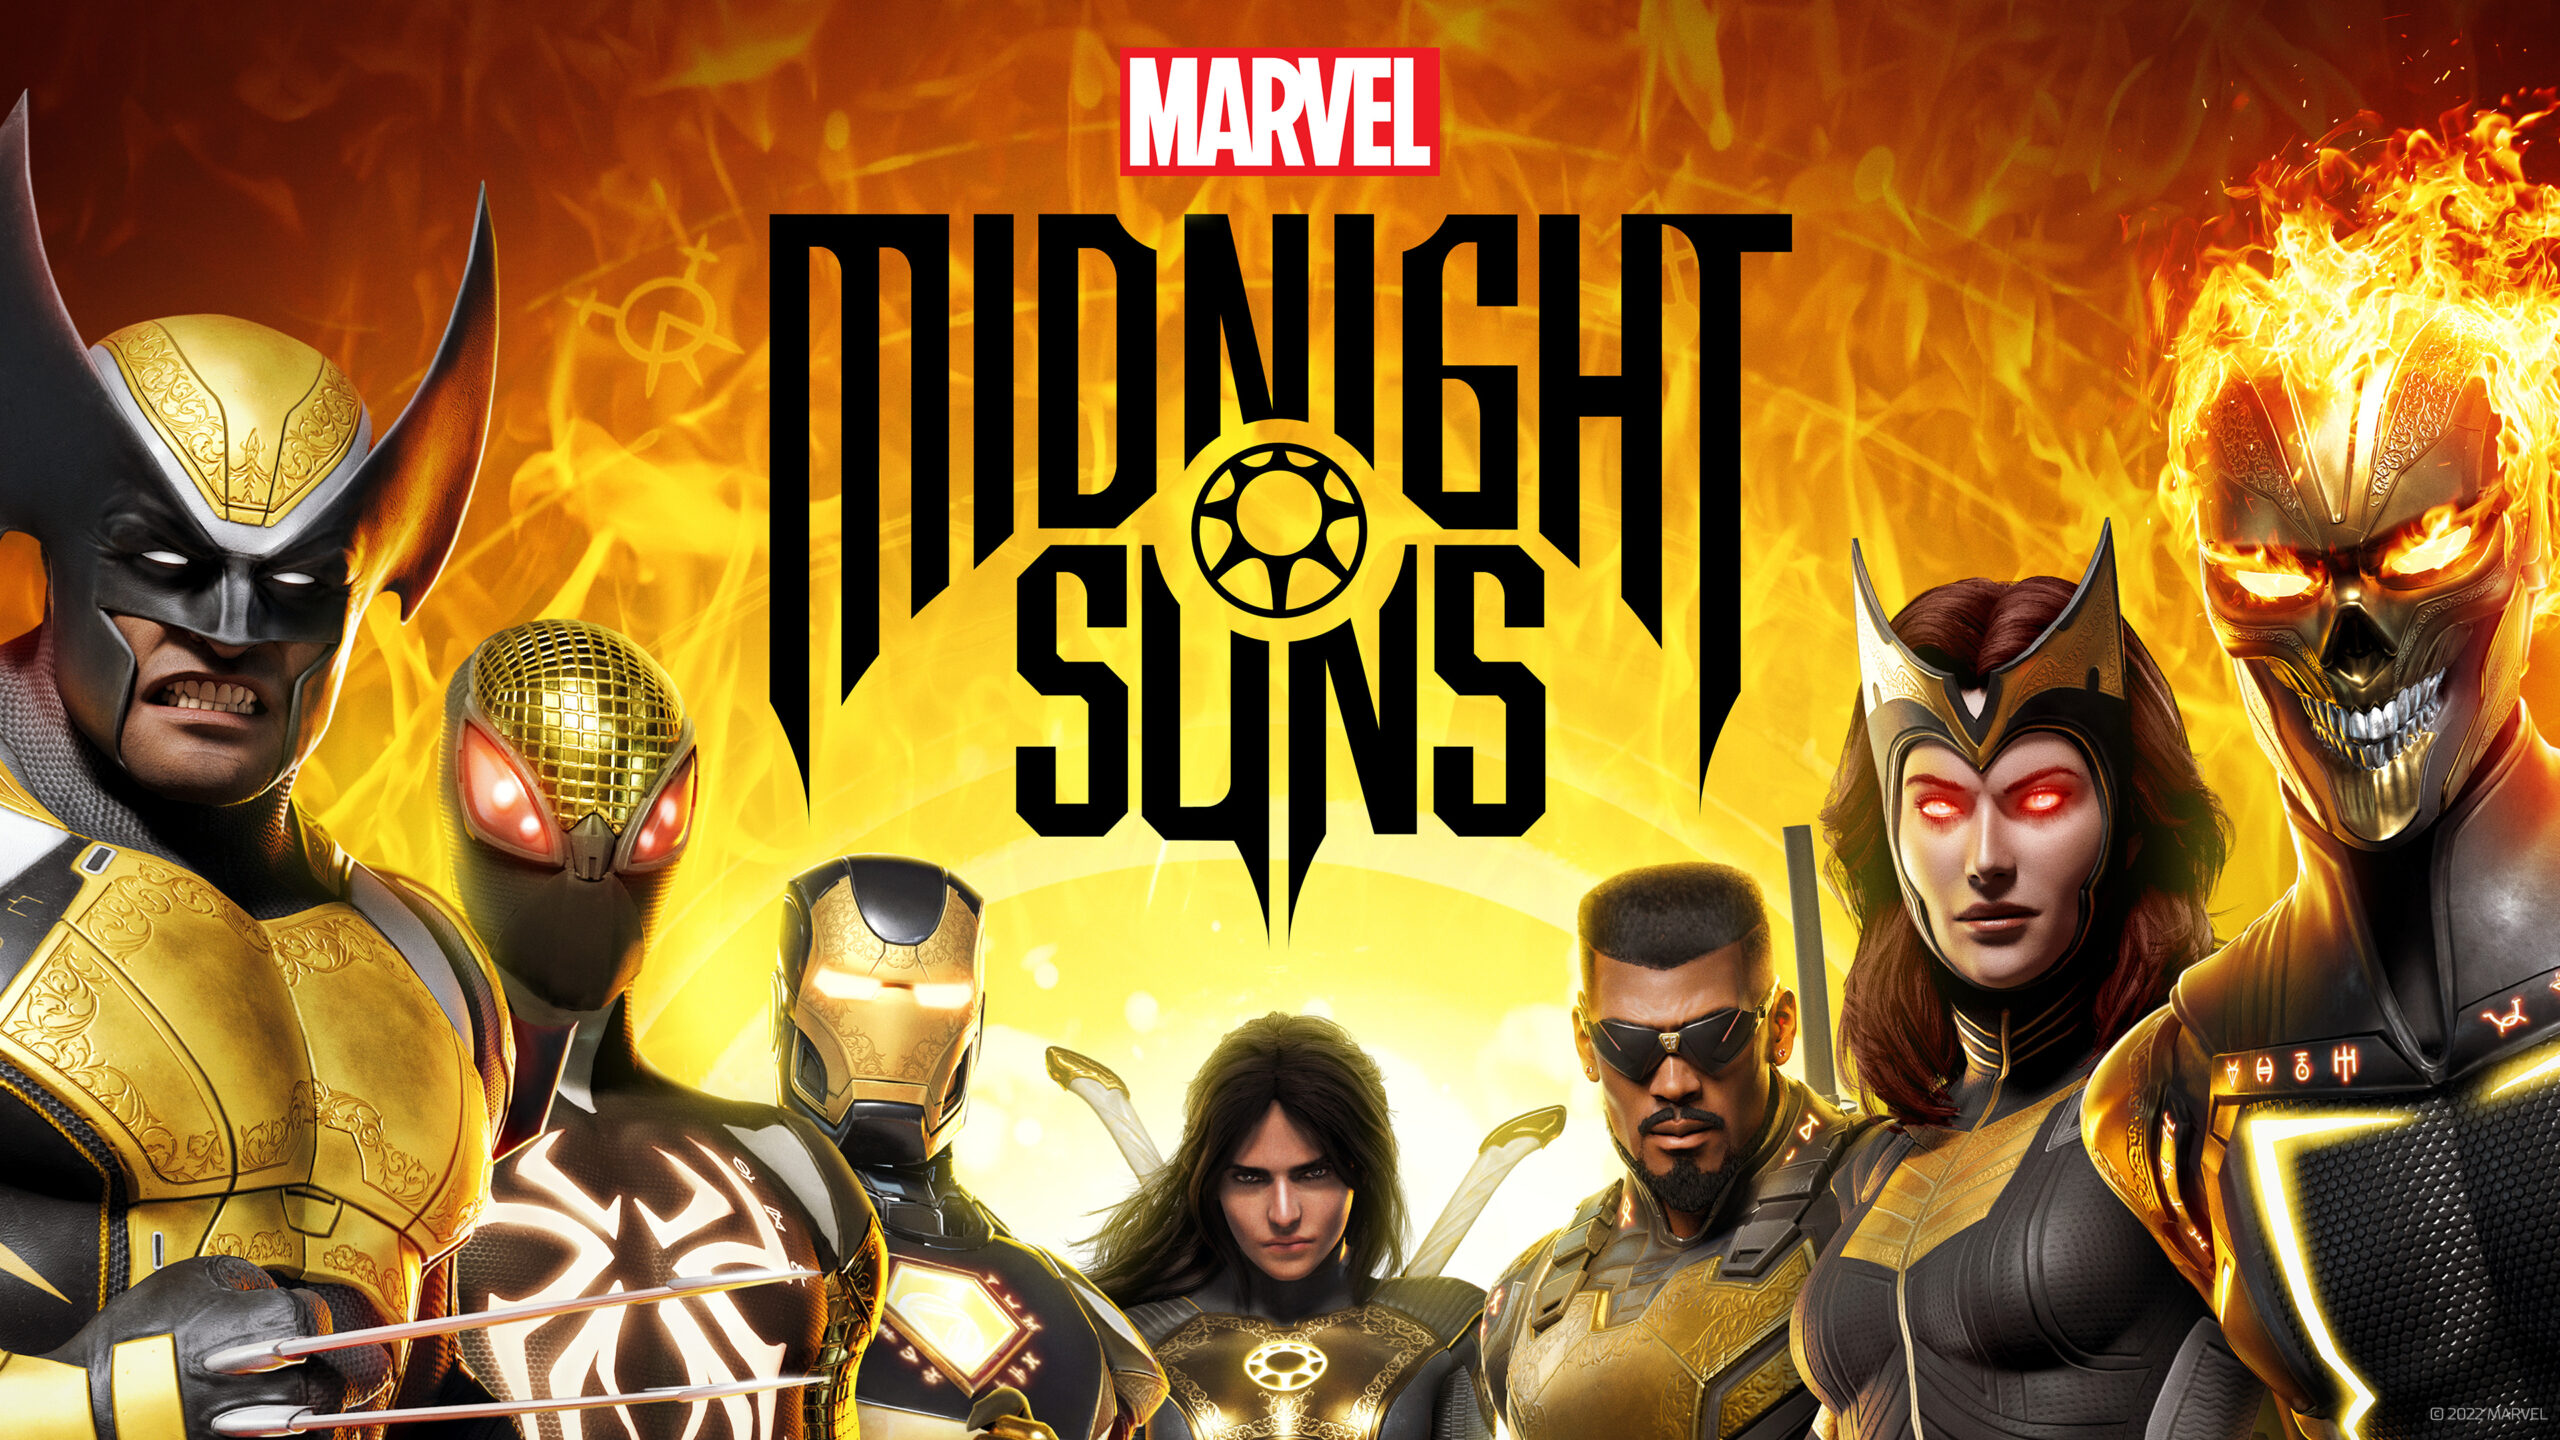 Marvel's Midnight Suns Delayed (Again), Switch Version To Arrive